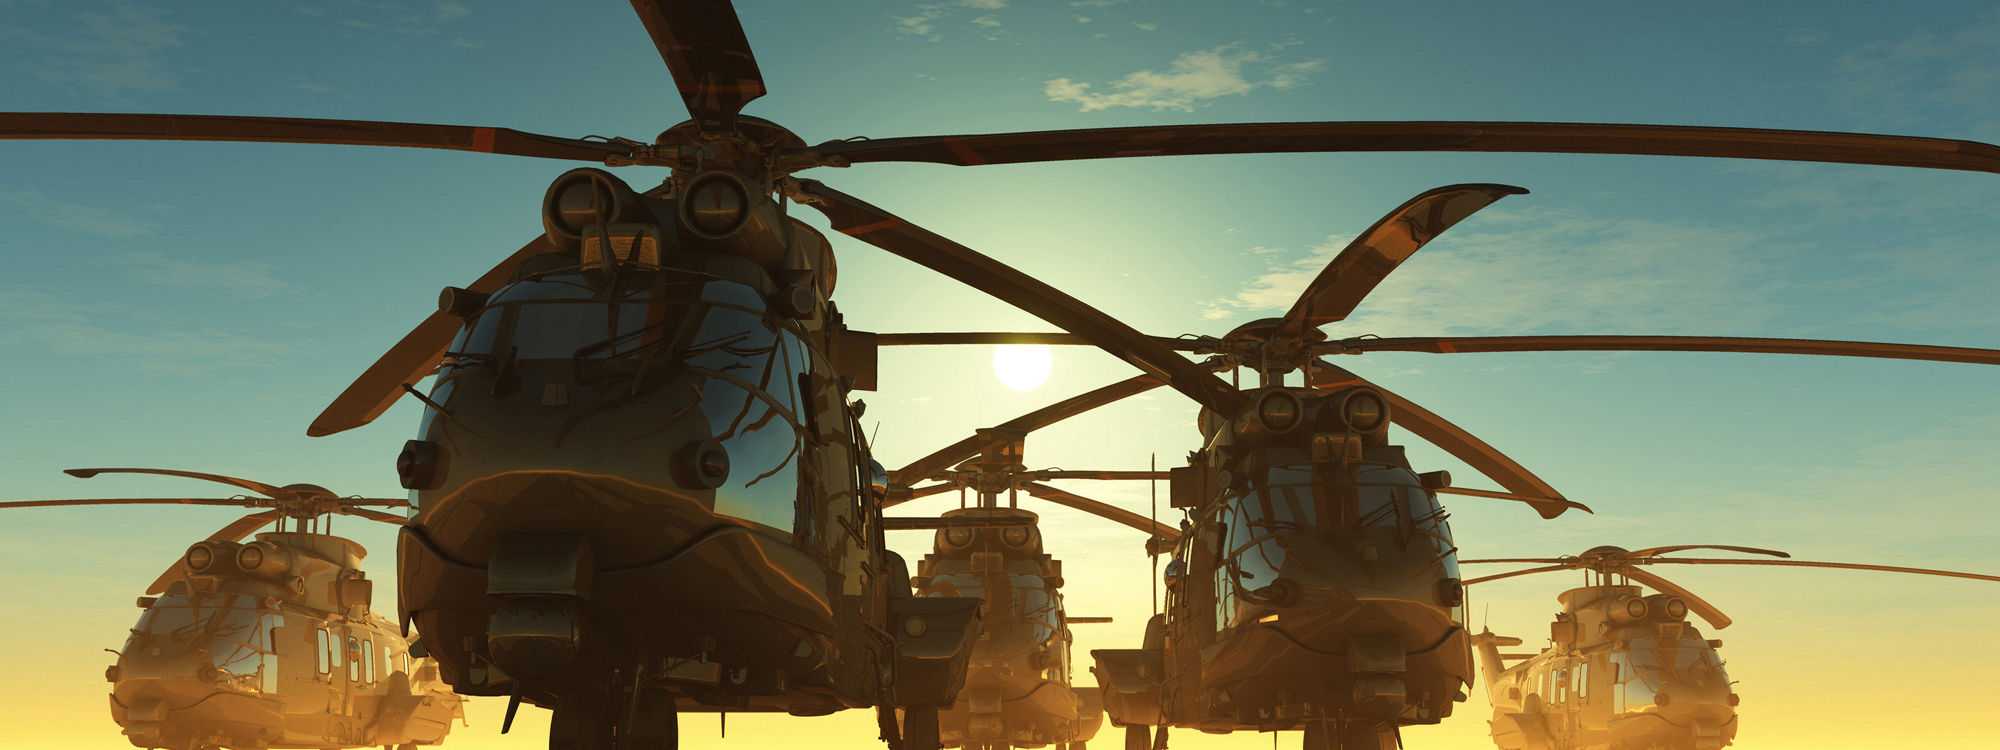 A group of military helicopters.3d render